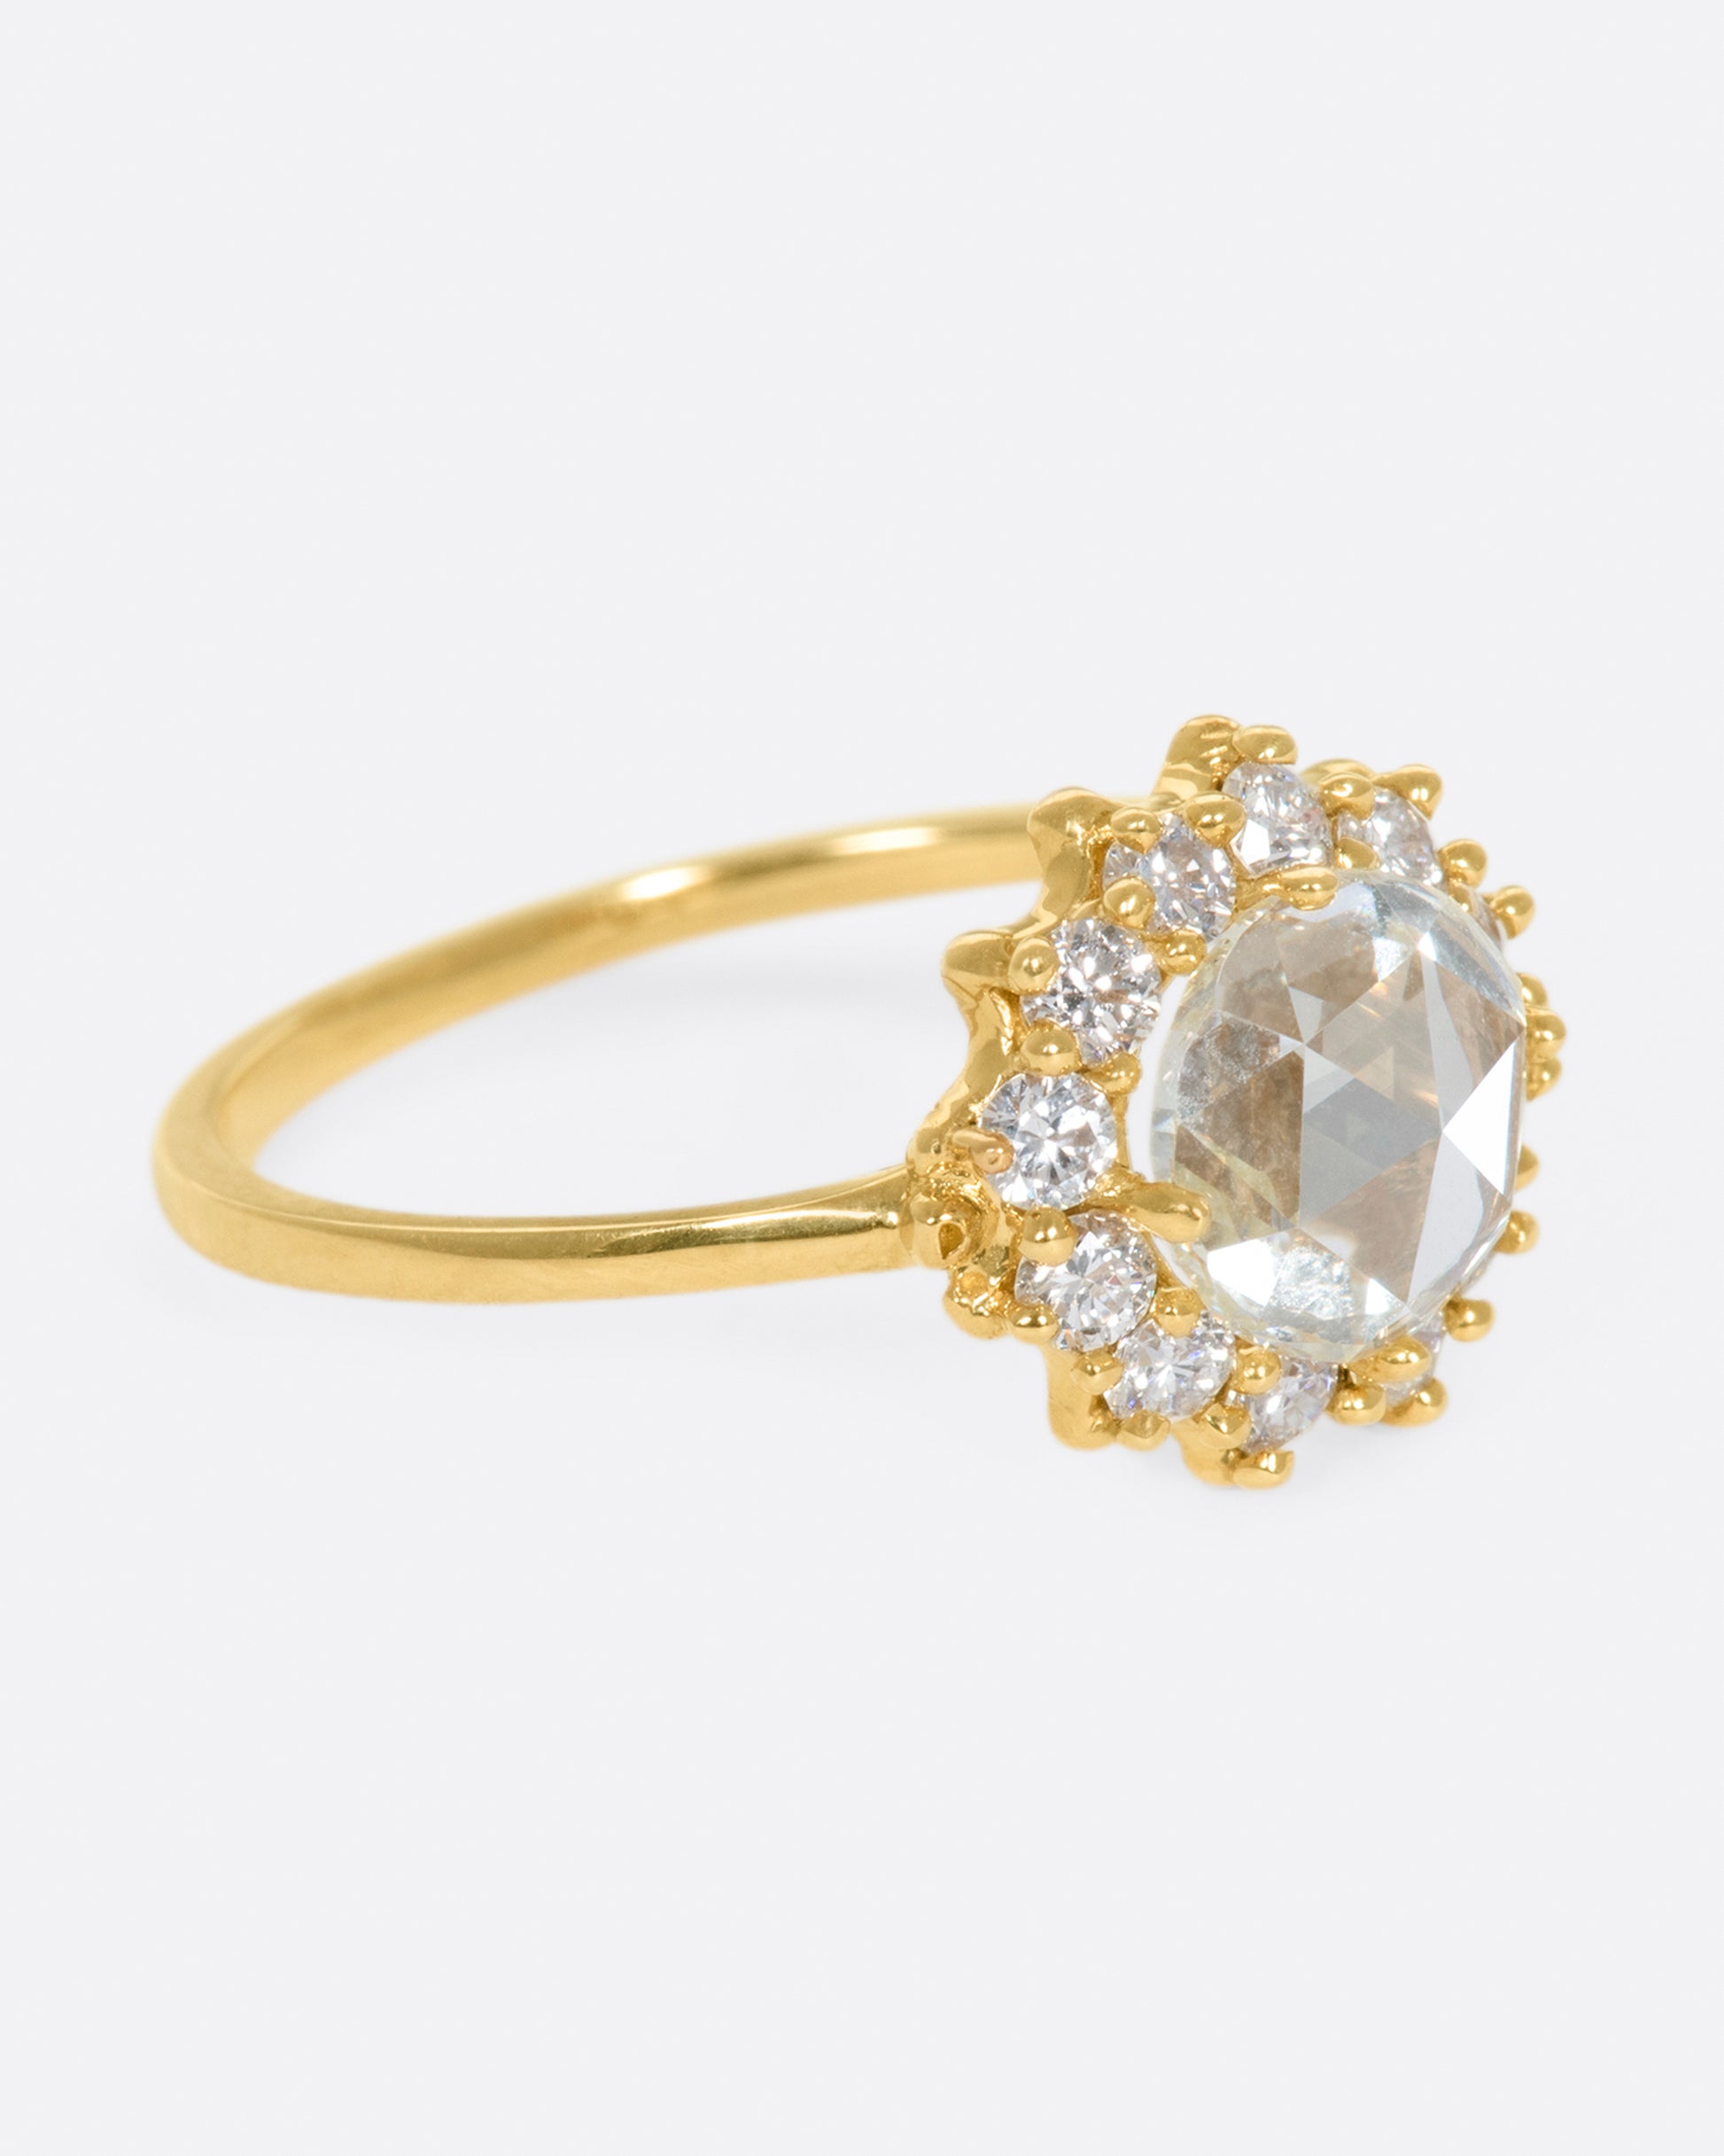 This light champagne, rose cut diamond is surrounded by a diamond halo, giving it the illusion of a shining sun.